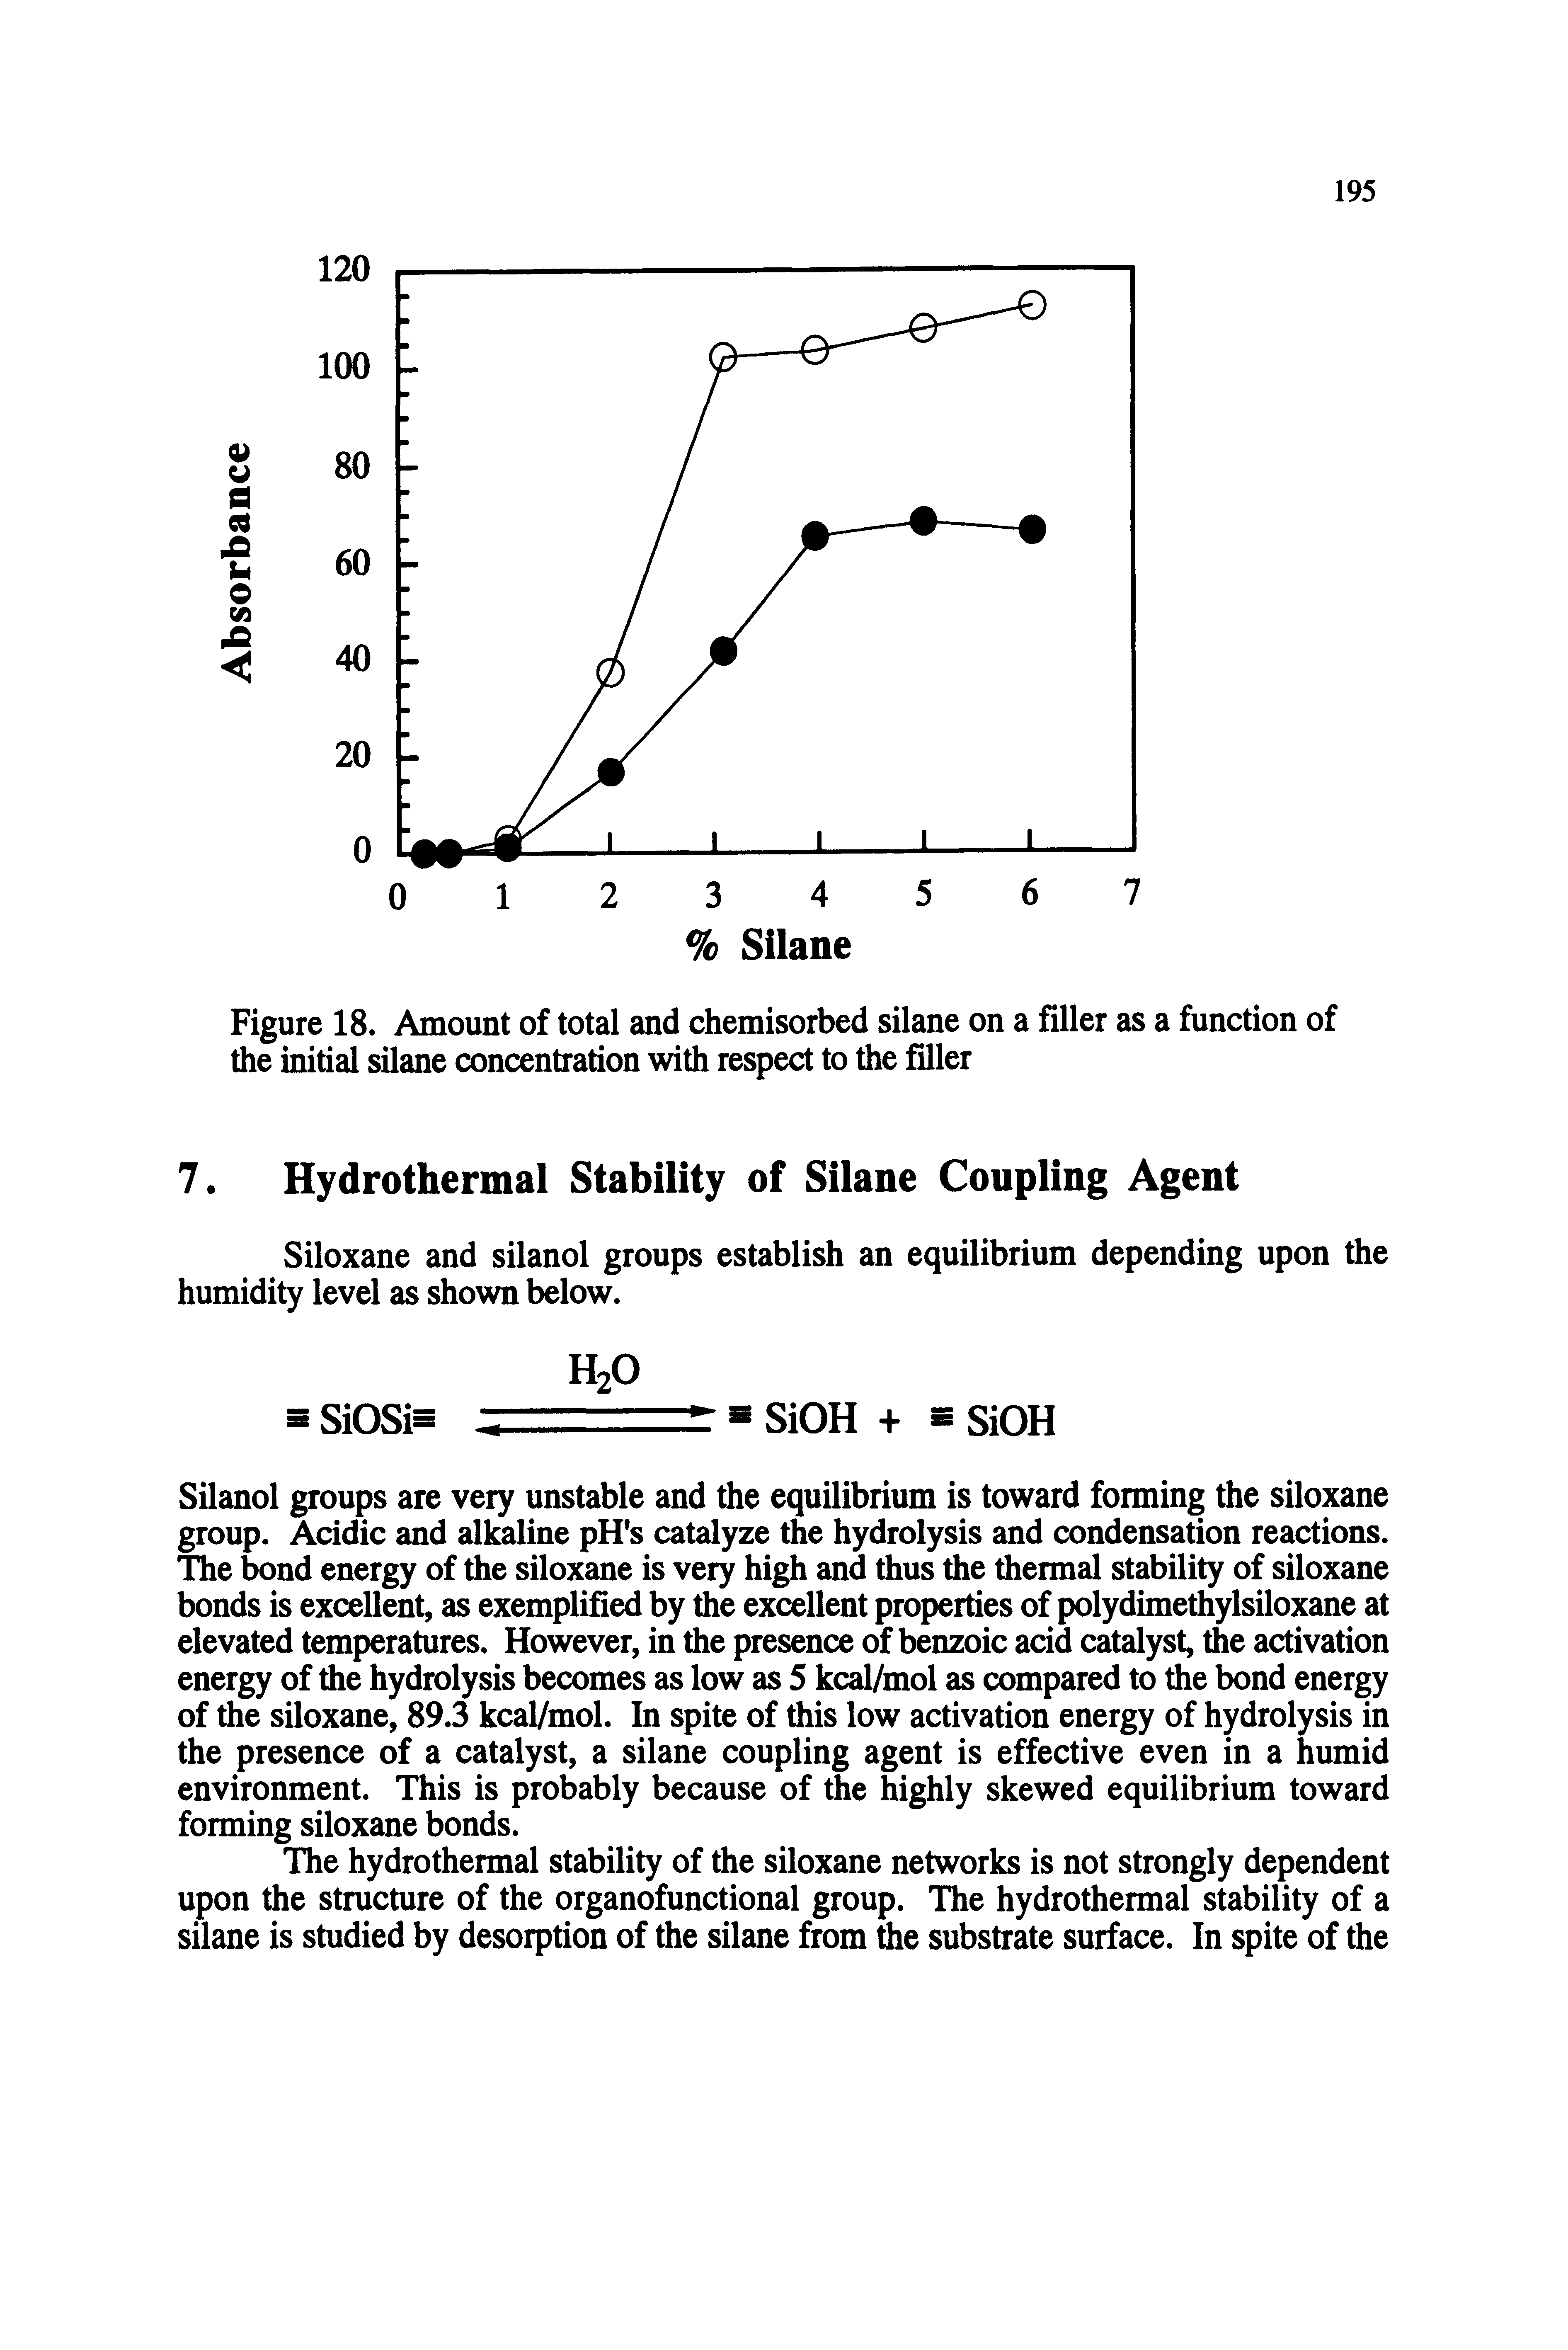 Figure 18. Amount of total and chemisorbed silane on a filler as a function of the initial silane concentration with respect to the filler...